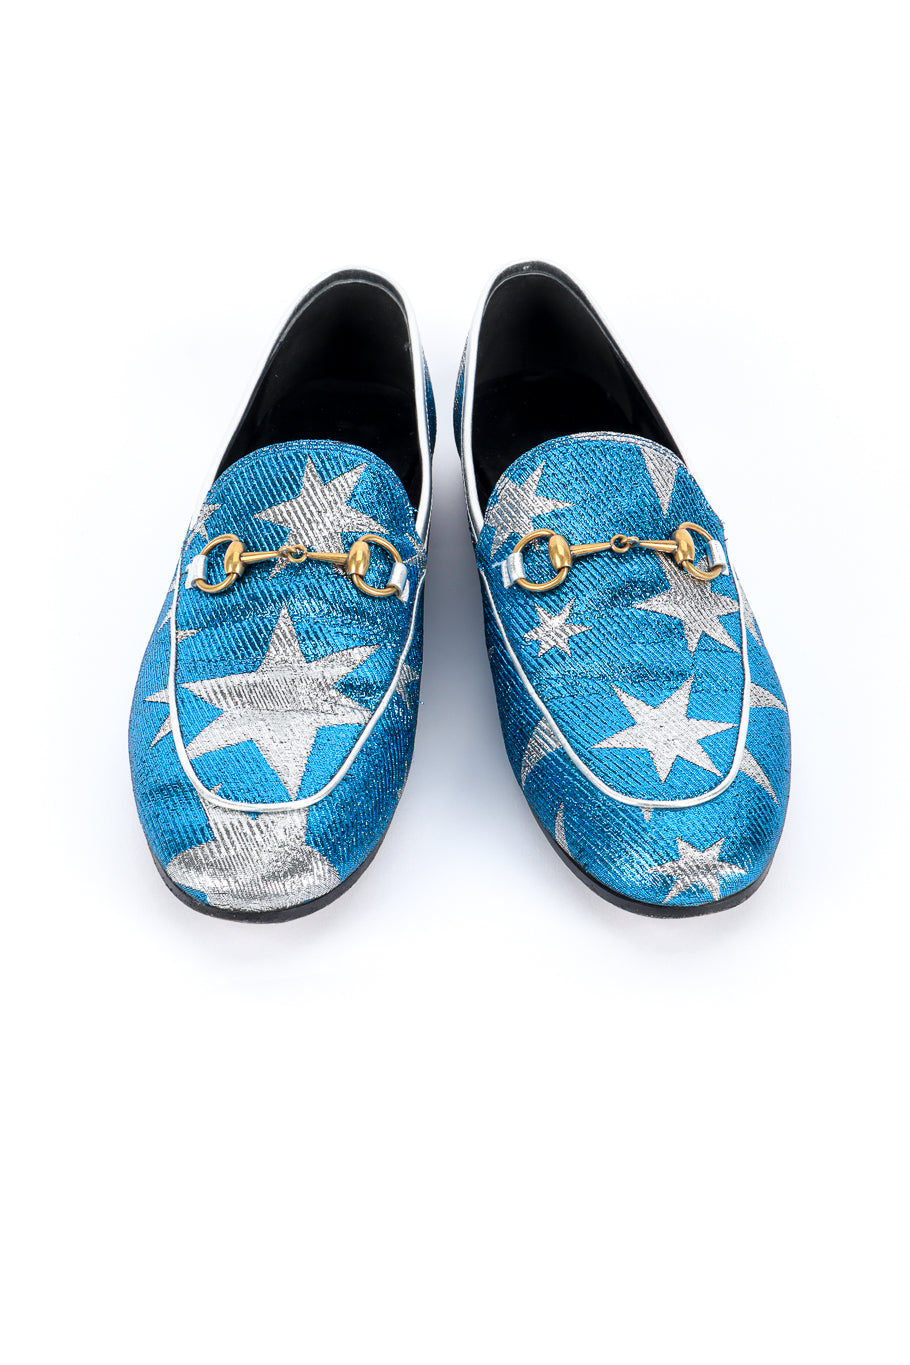 Gucci Starry Sky Lurex Loafers front @recess la